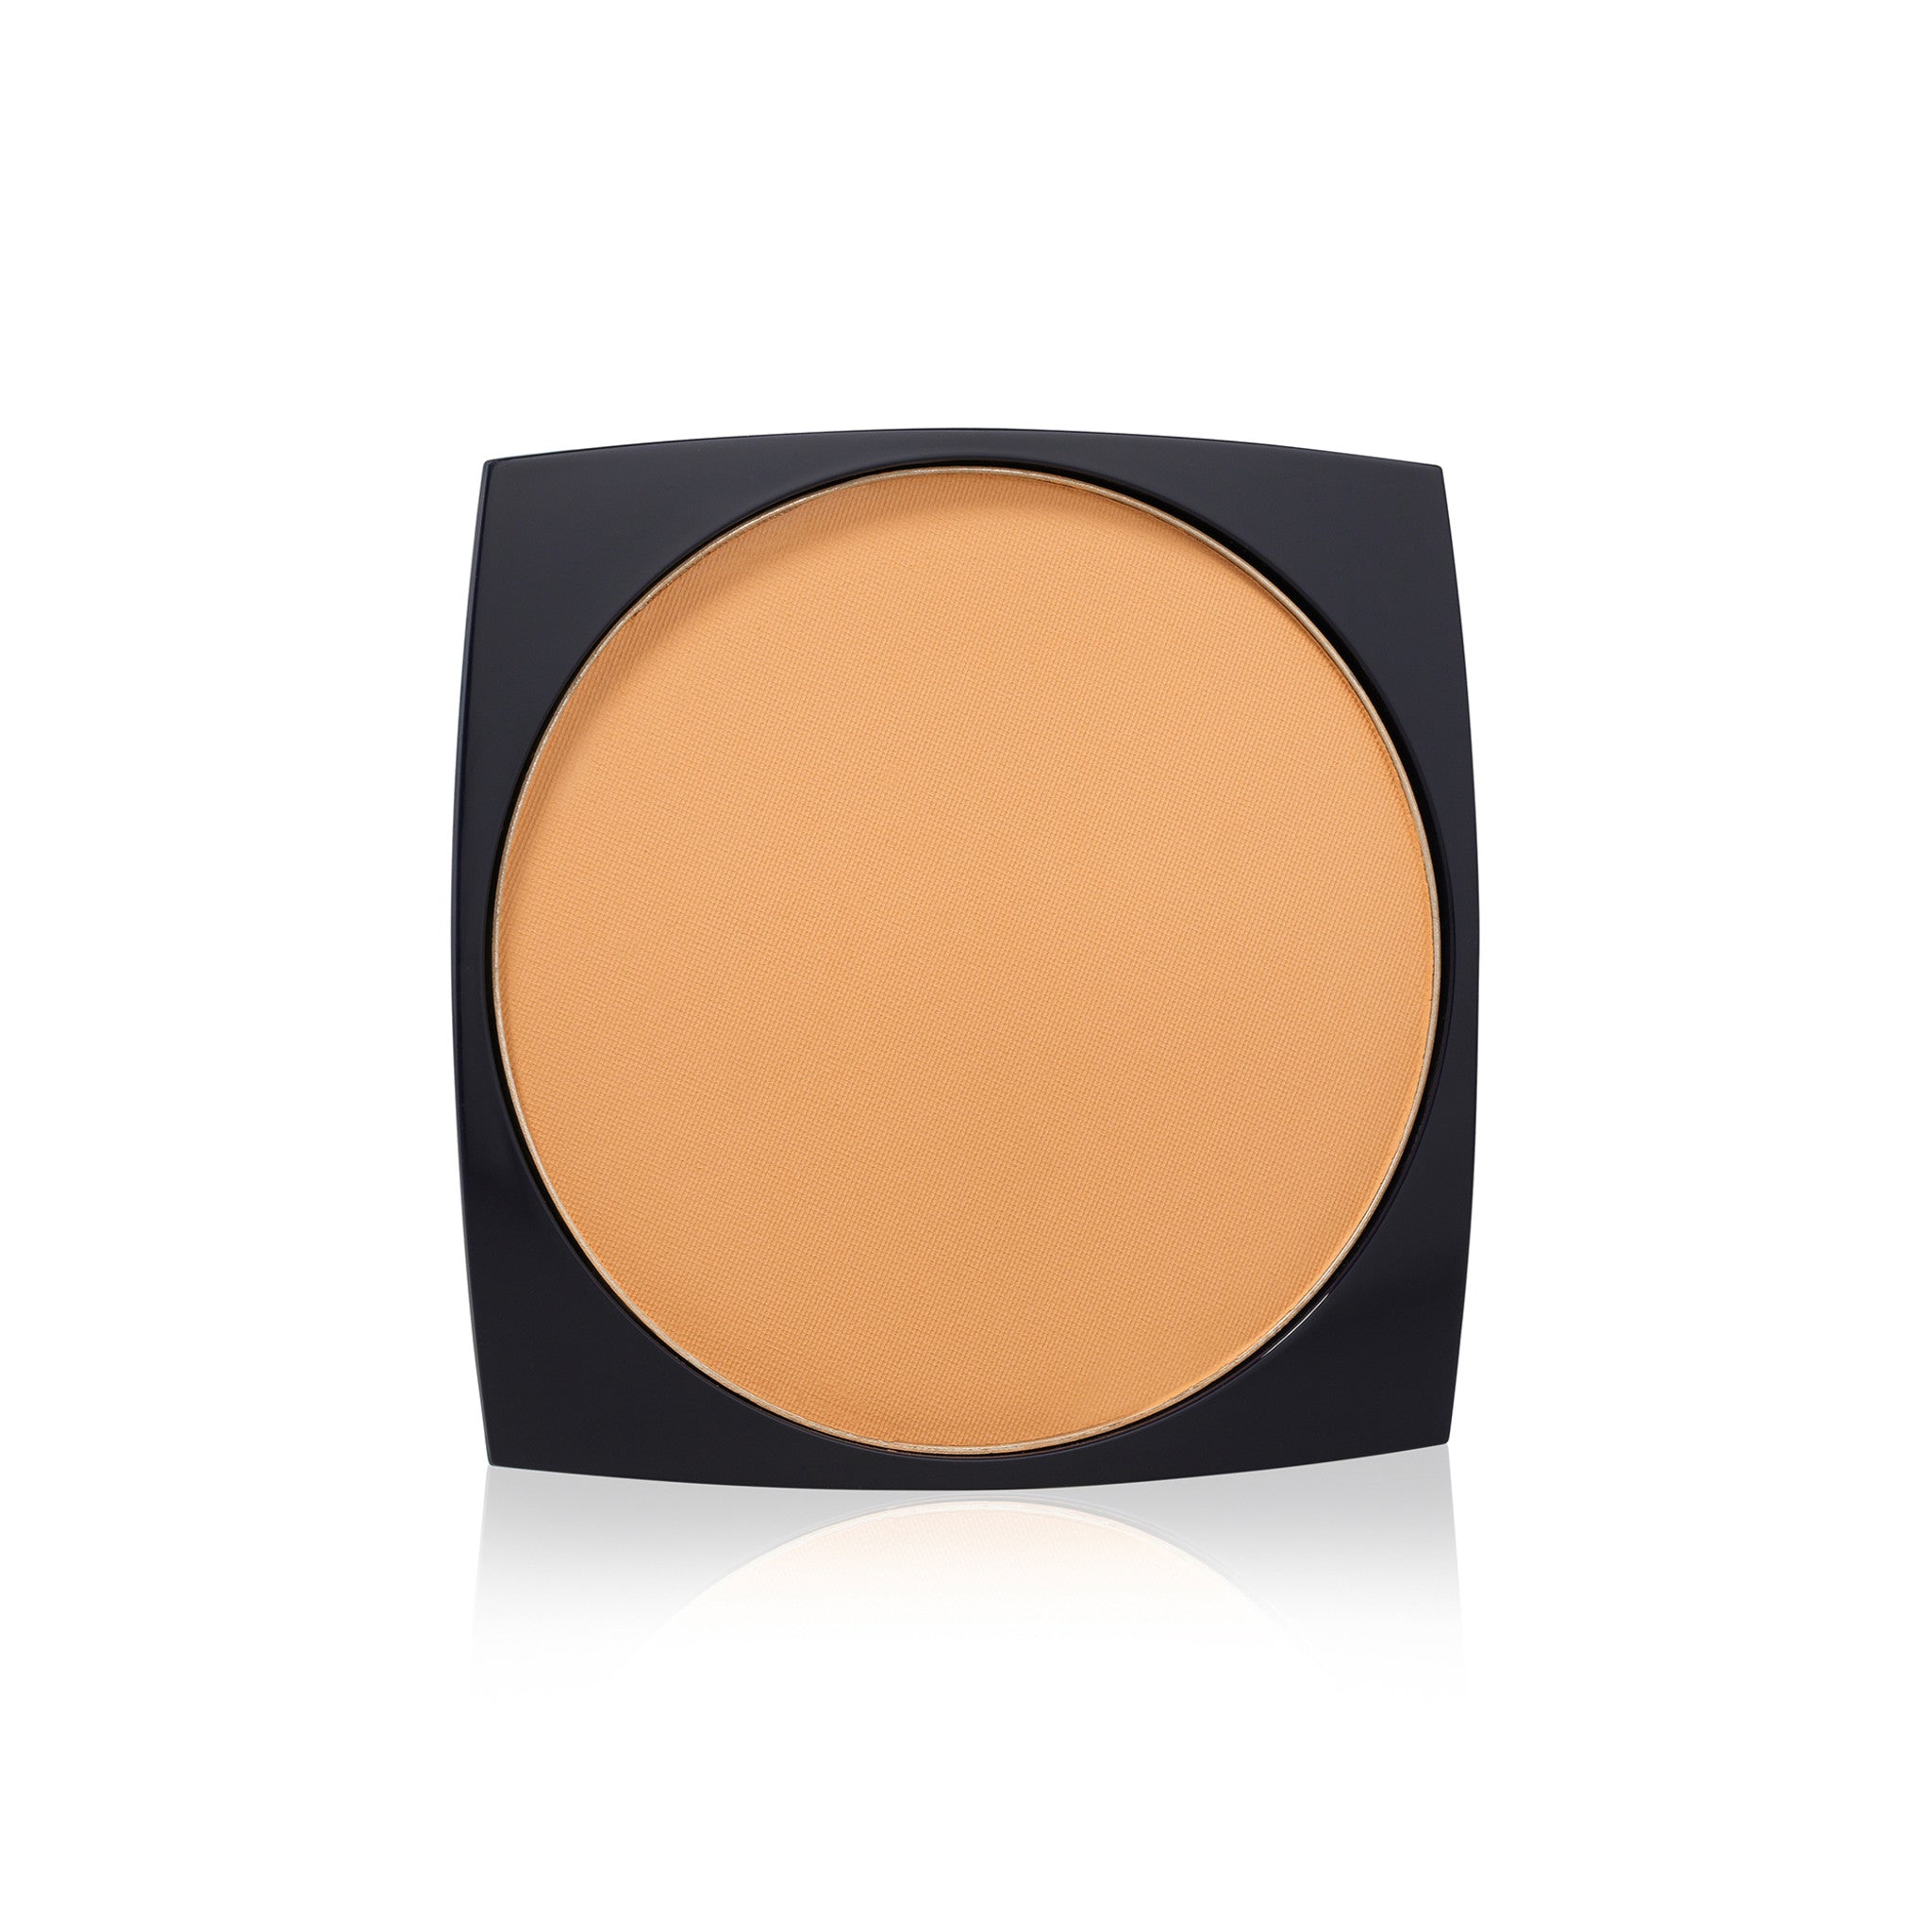 Estée Lauder Double Wear Stay in Place Matte Powder Foundation Refill Color/Shade variant: 6W1 Sandalwood main image. This product is for deep complexions